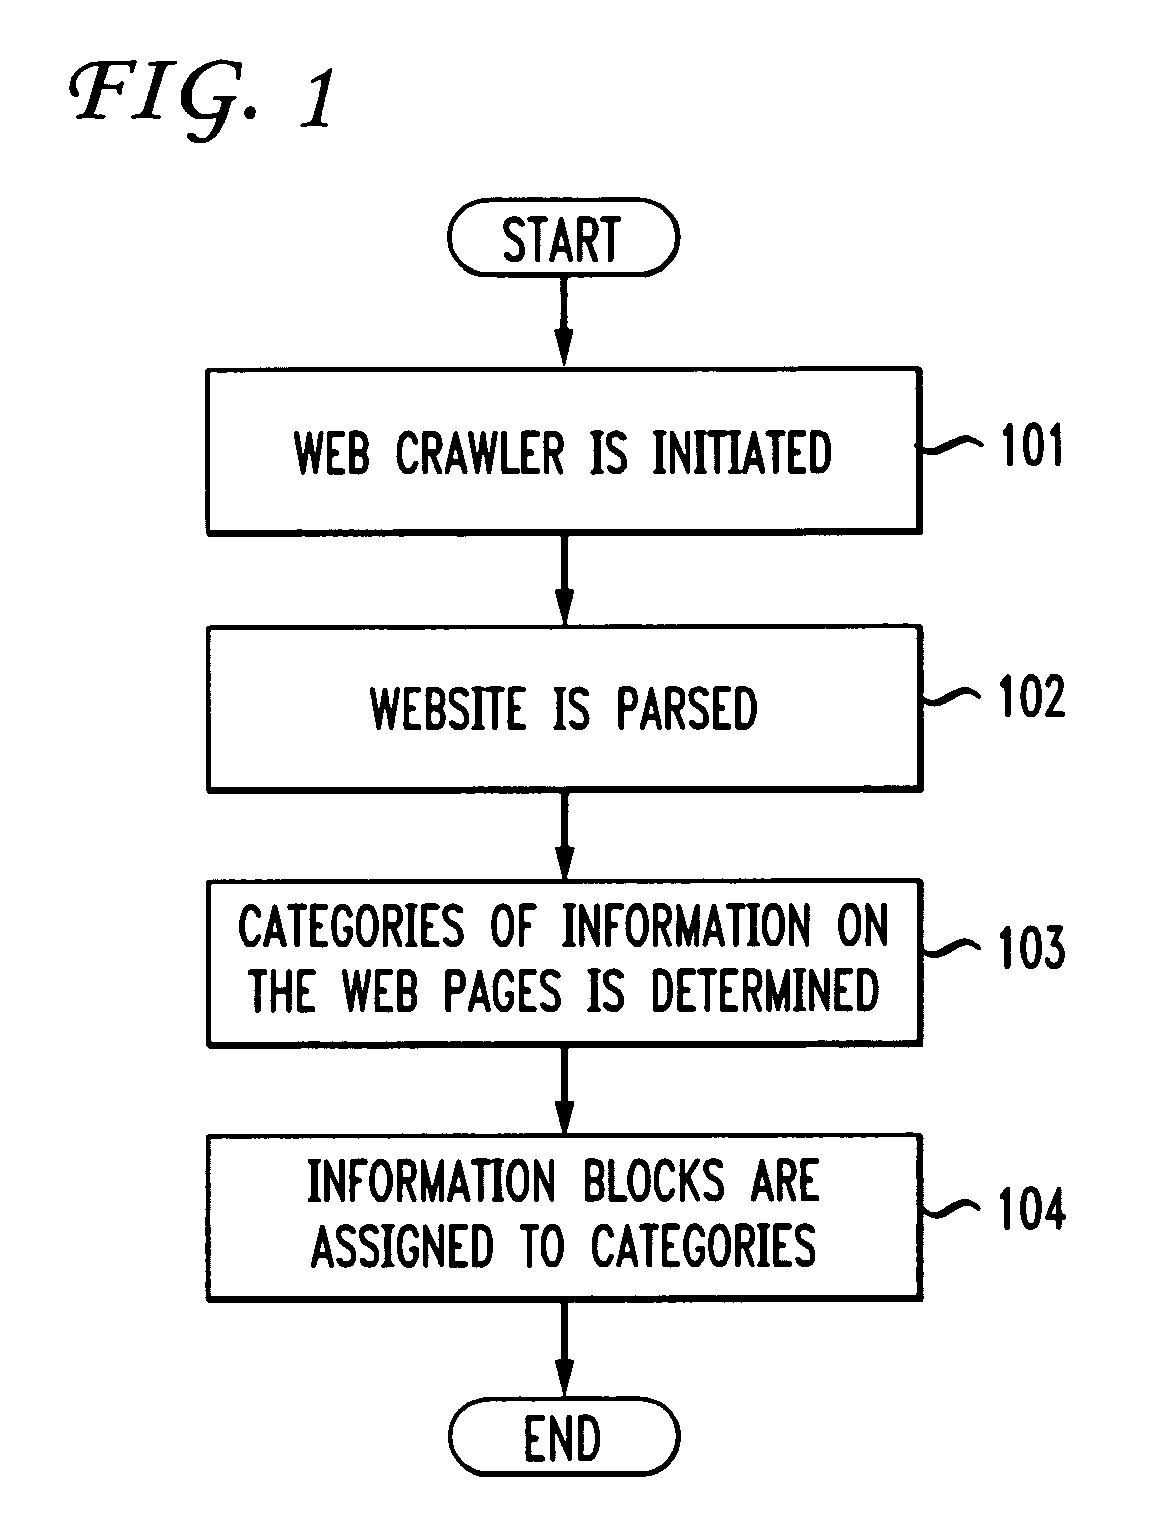 Method and apparatus for building sales tools by mining data from websites